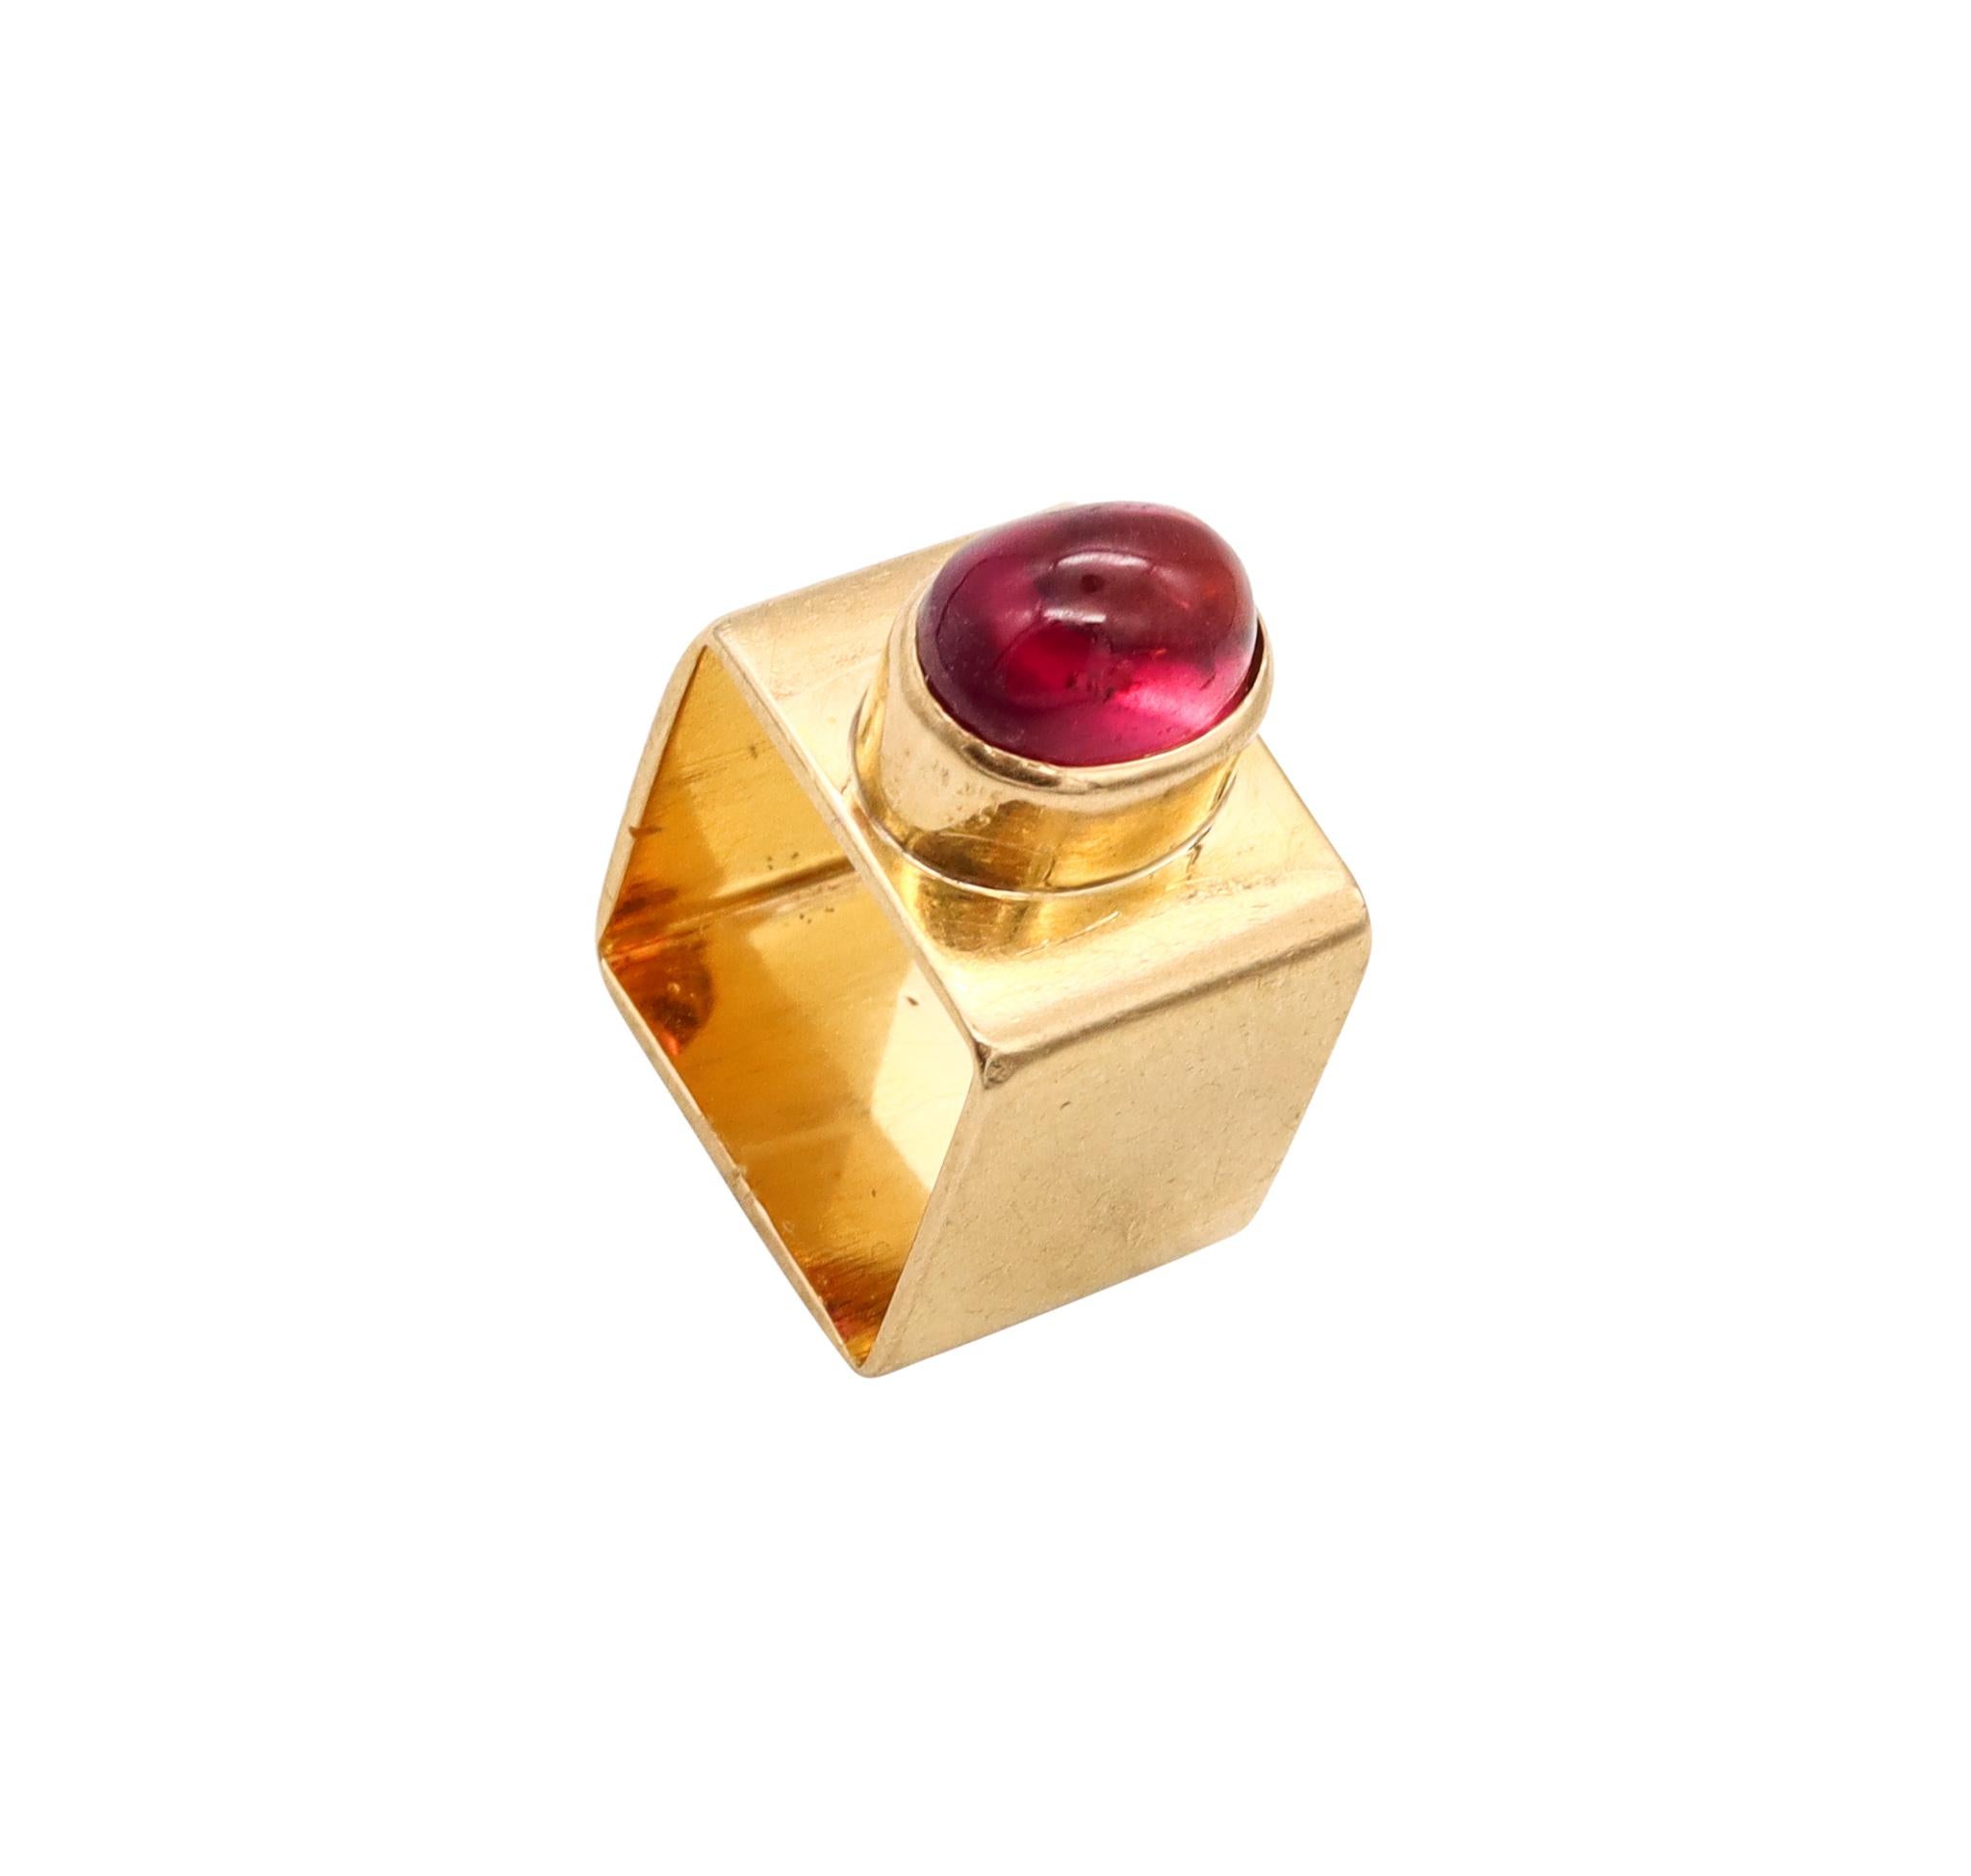 Cartier 1968 Paris Dinh Van 18Kt Gold Geometric Ring 3.27 Cts Red Tourmaline For Sale 3